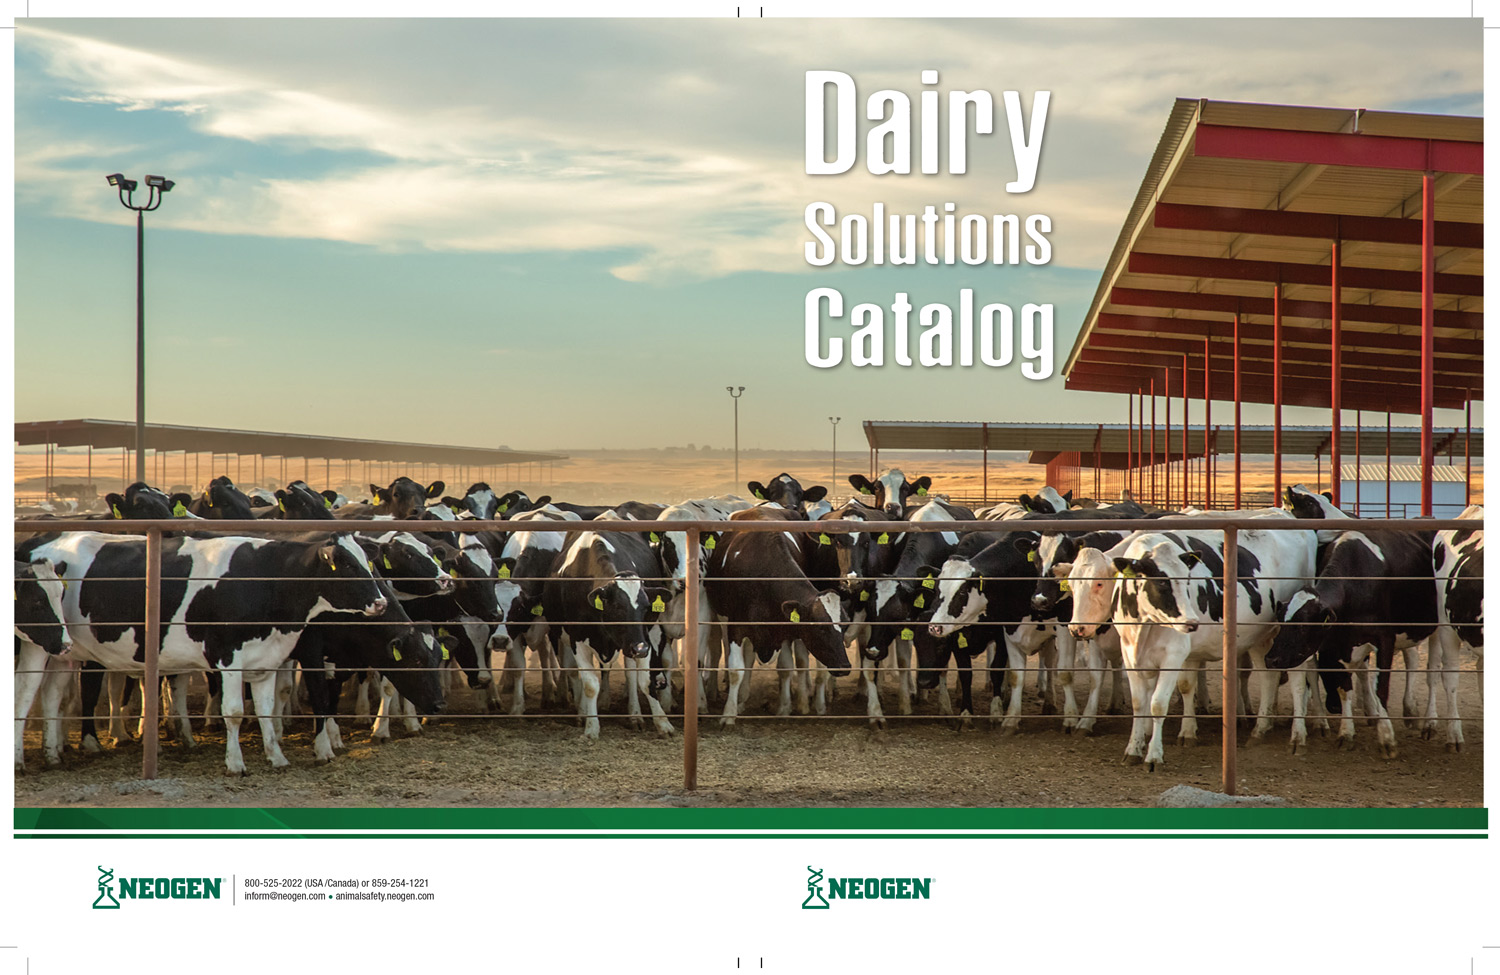 Dairy-Industry-Stock-Photography